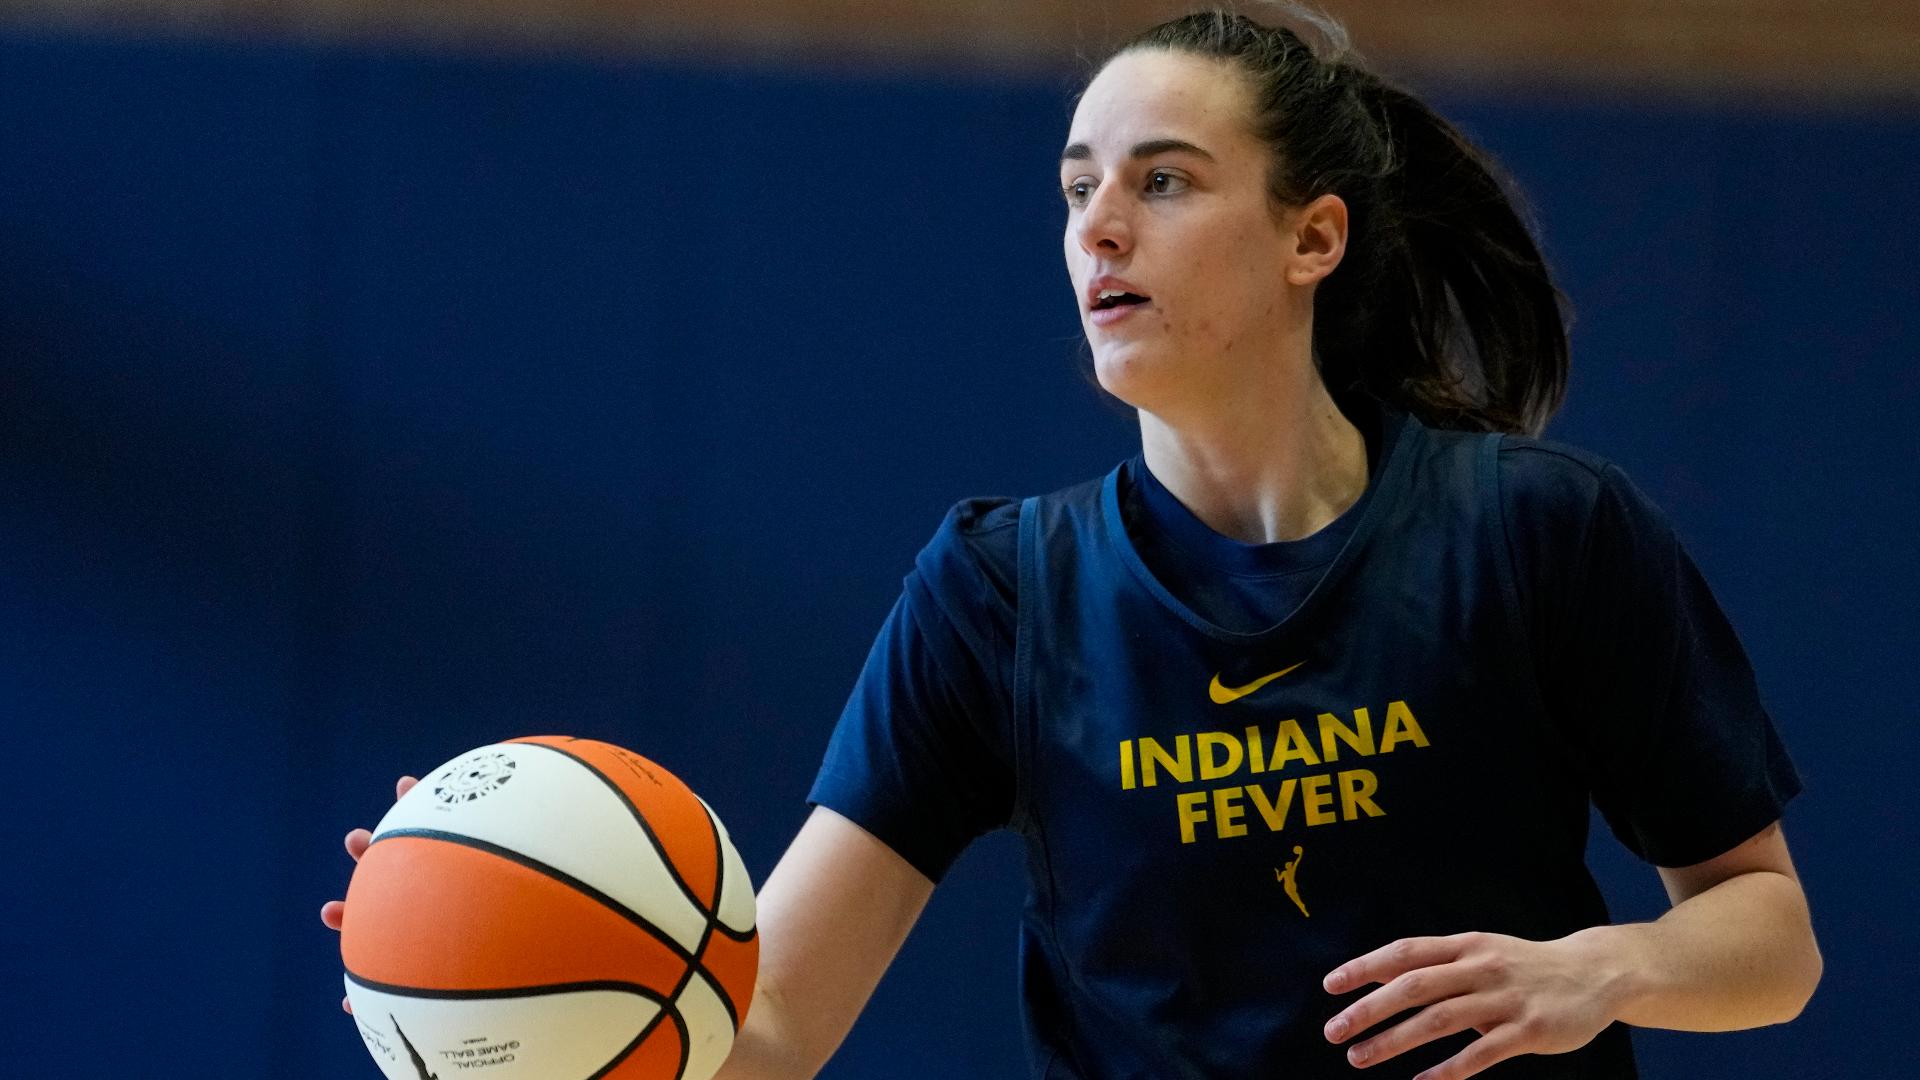 Former Iowa Hawkeye star Caitlin Clark said in a post on the Fever's Instagram page: "I was excited to just get here and get back to playing basketball."